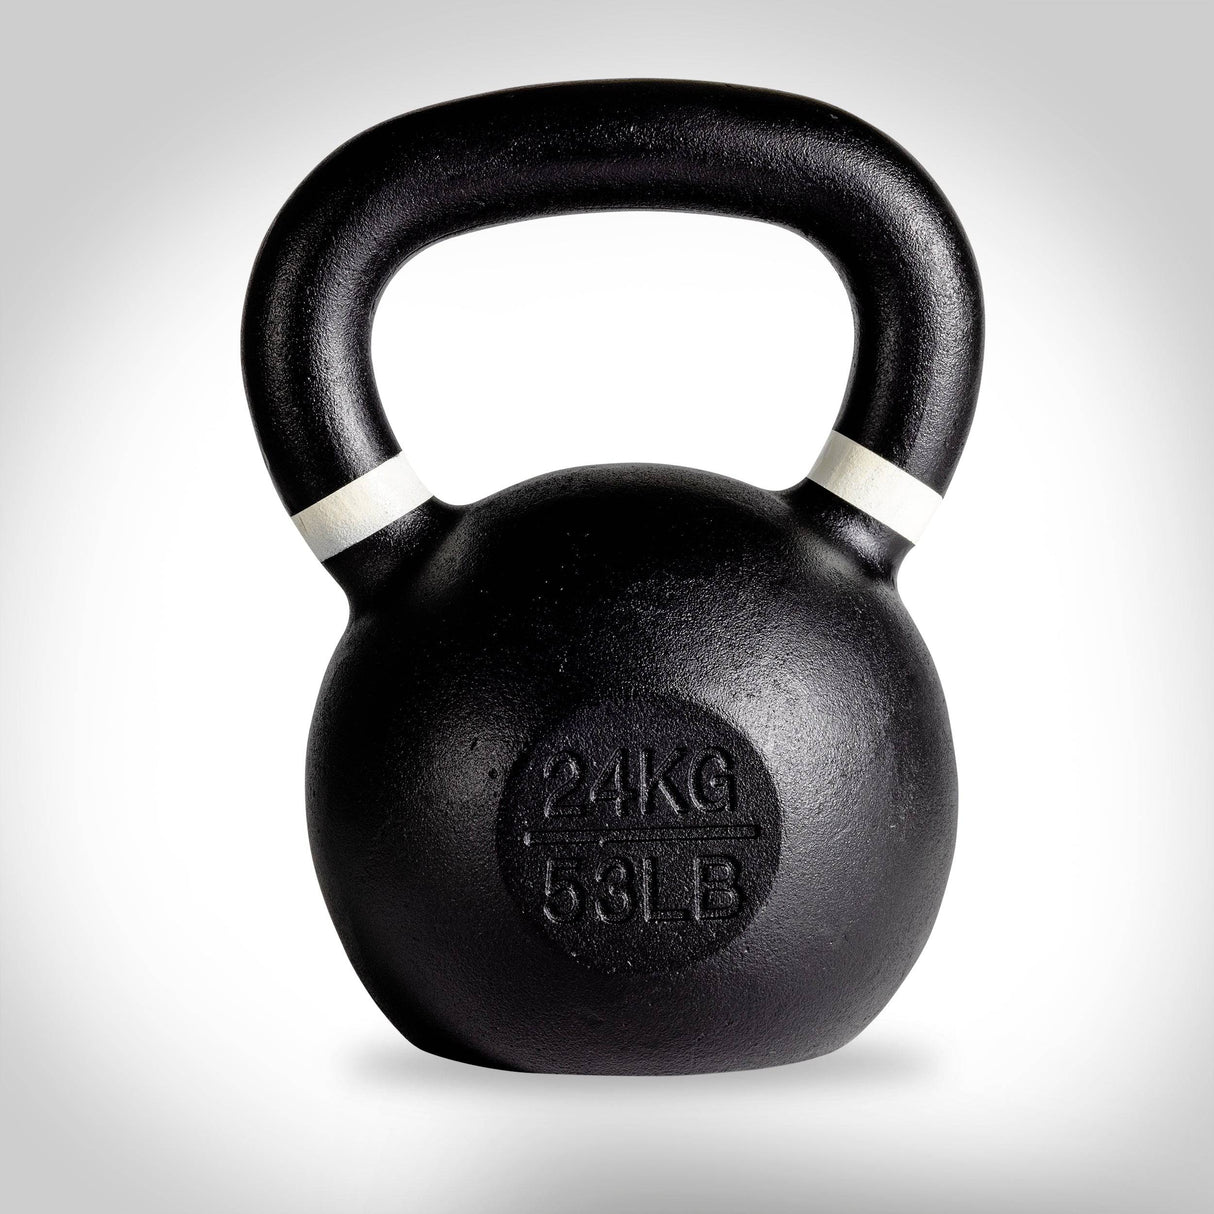 Supreme Tru Grit Cast Iron Kettlebell 6kg (13.2 Lbs)AUTHENTIC**CONFIRMED  ORDER**